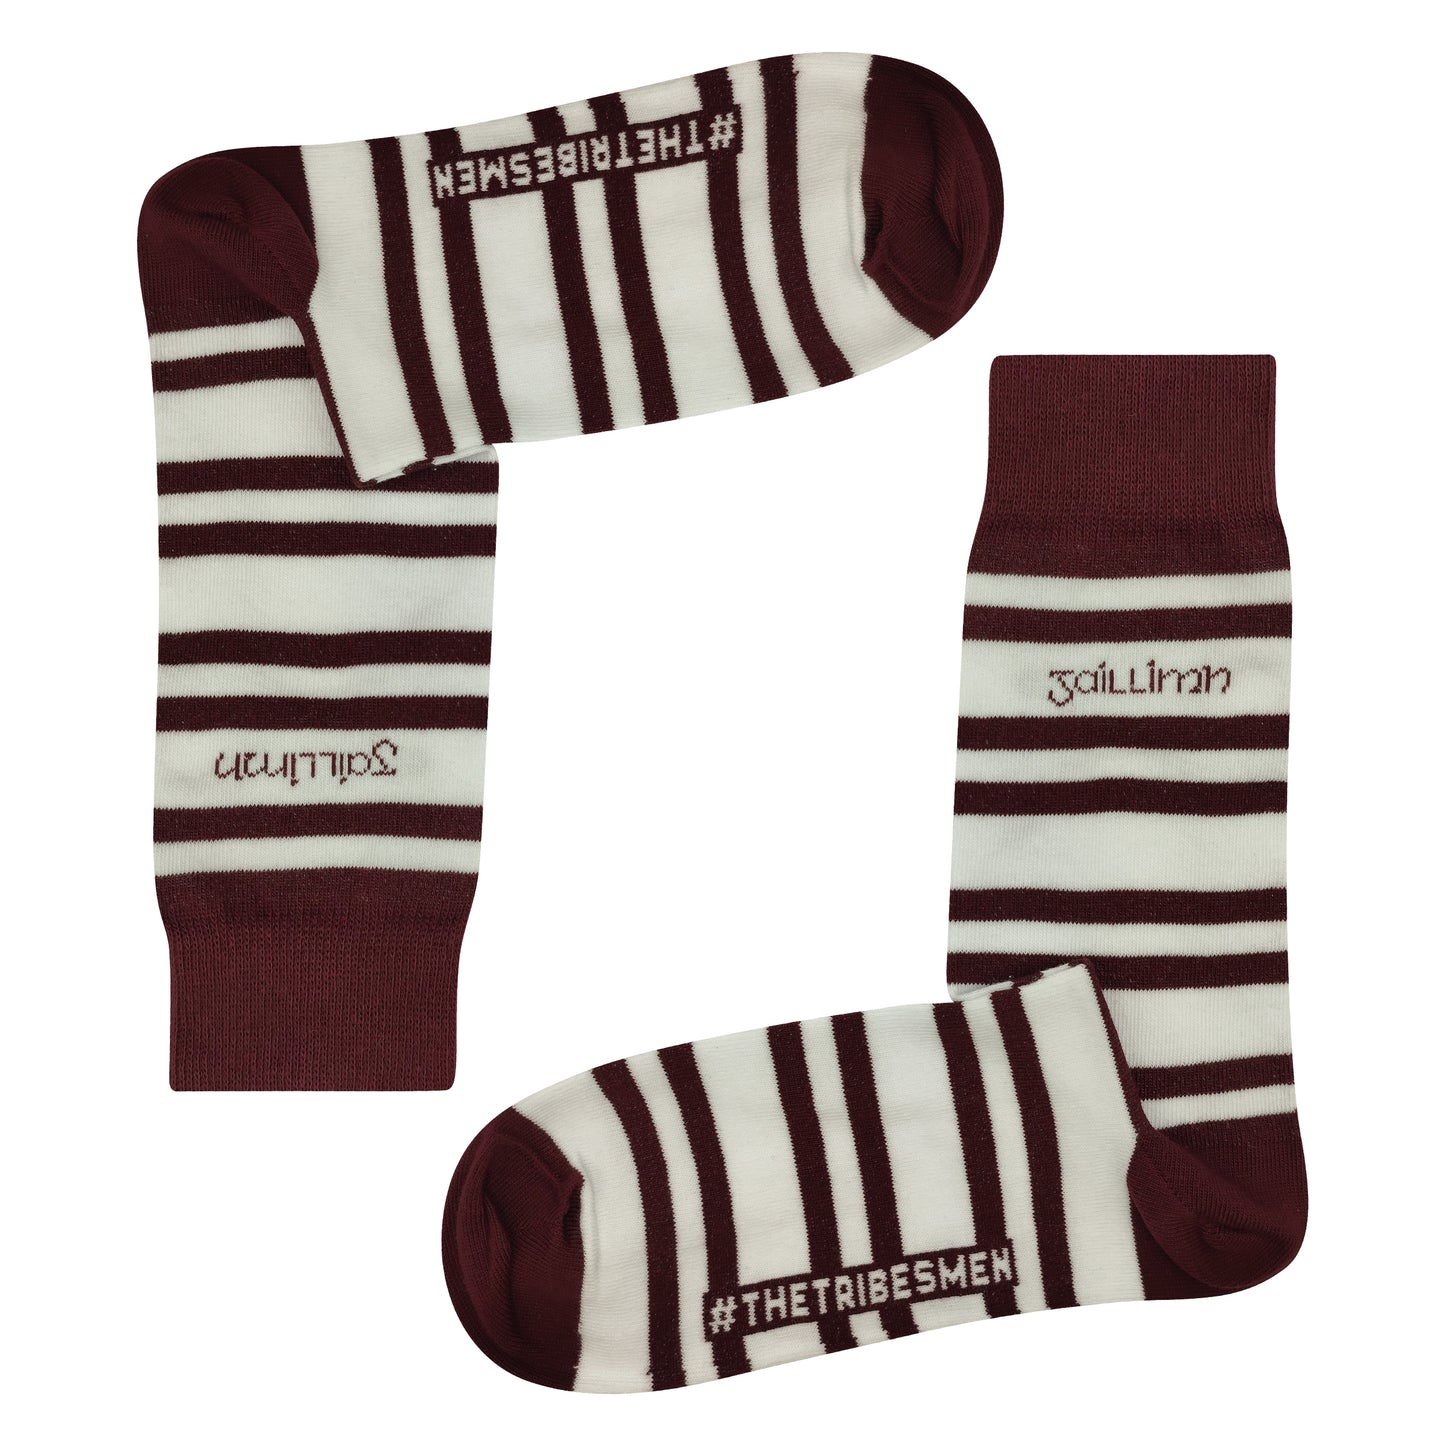 Galway Retro Sock Gift Box | Signed By Padraic Mannion | Size UK 7 - 11